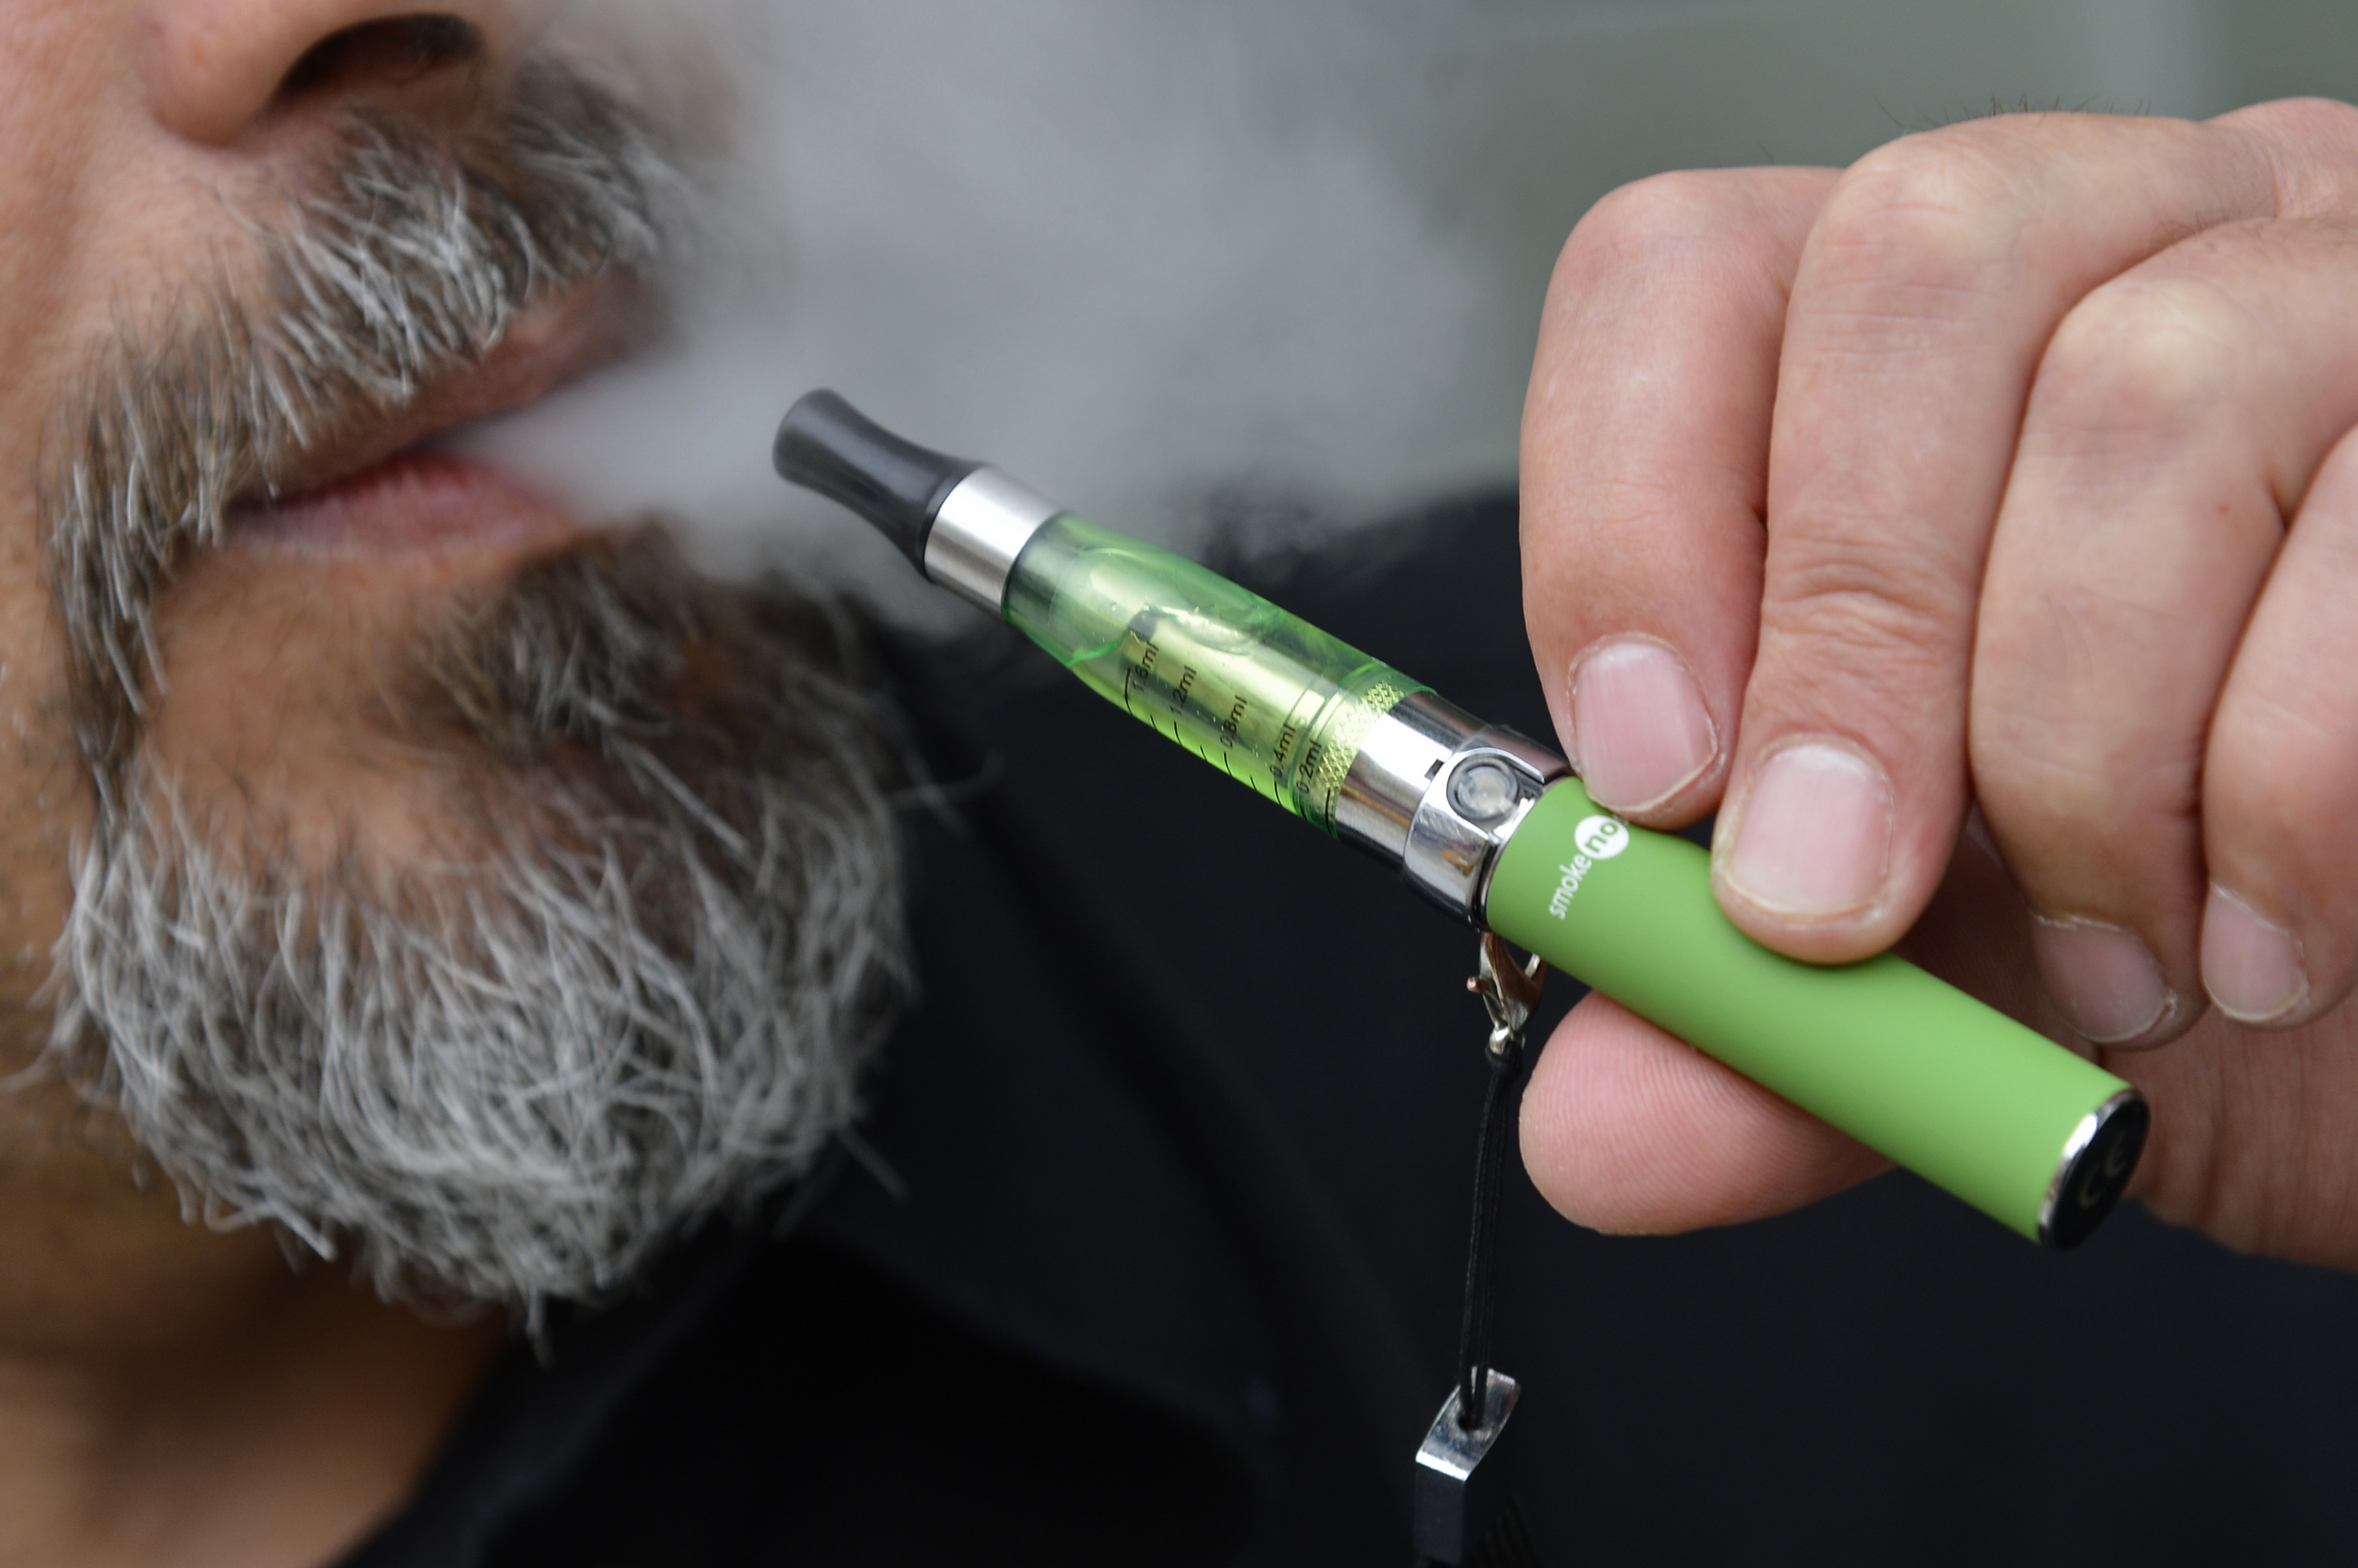 vaping-gives-lung-bacteria-the-power-to-cause-more-damage-to-your-body